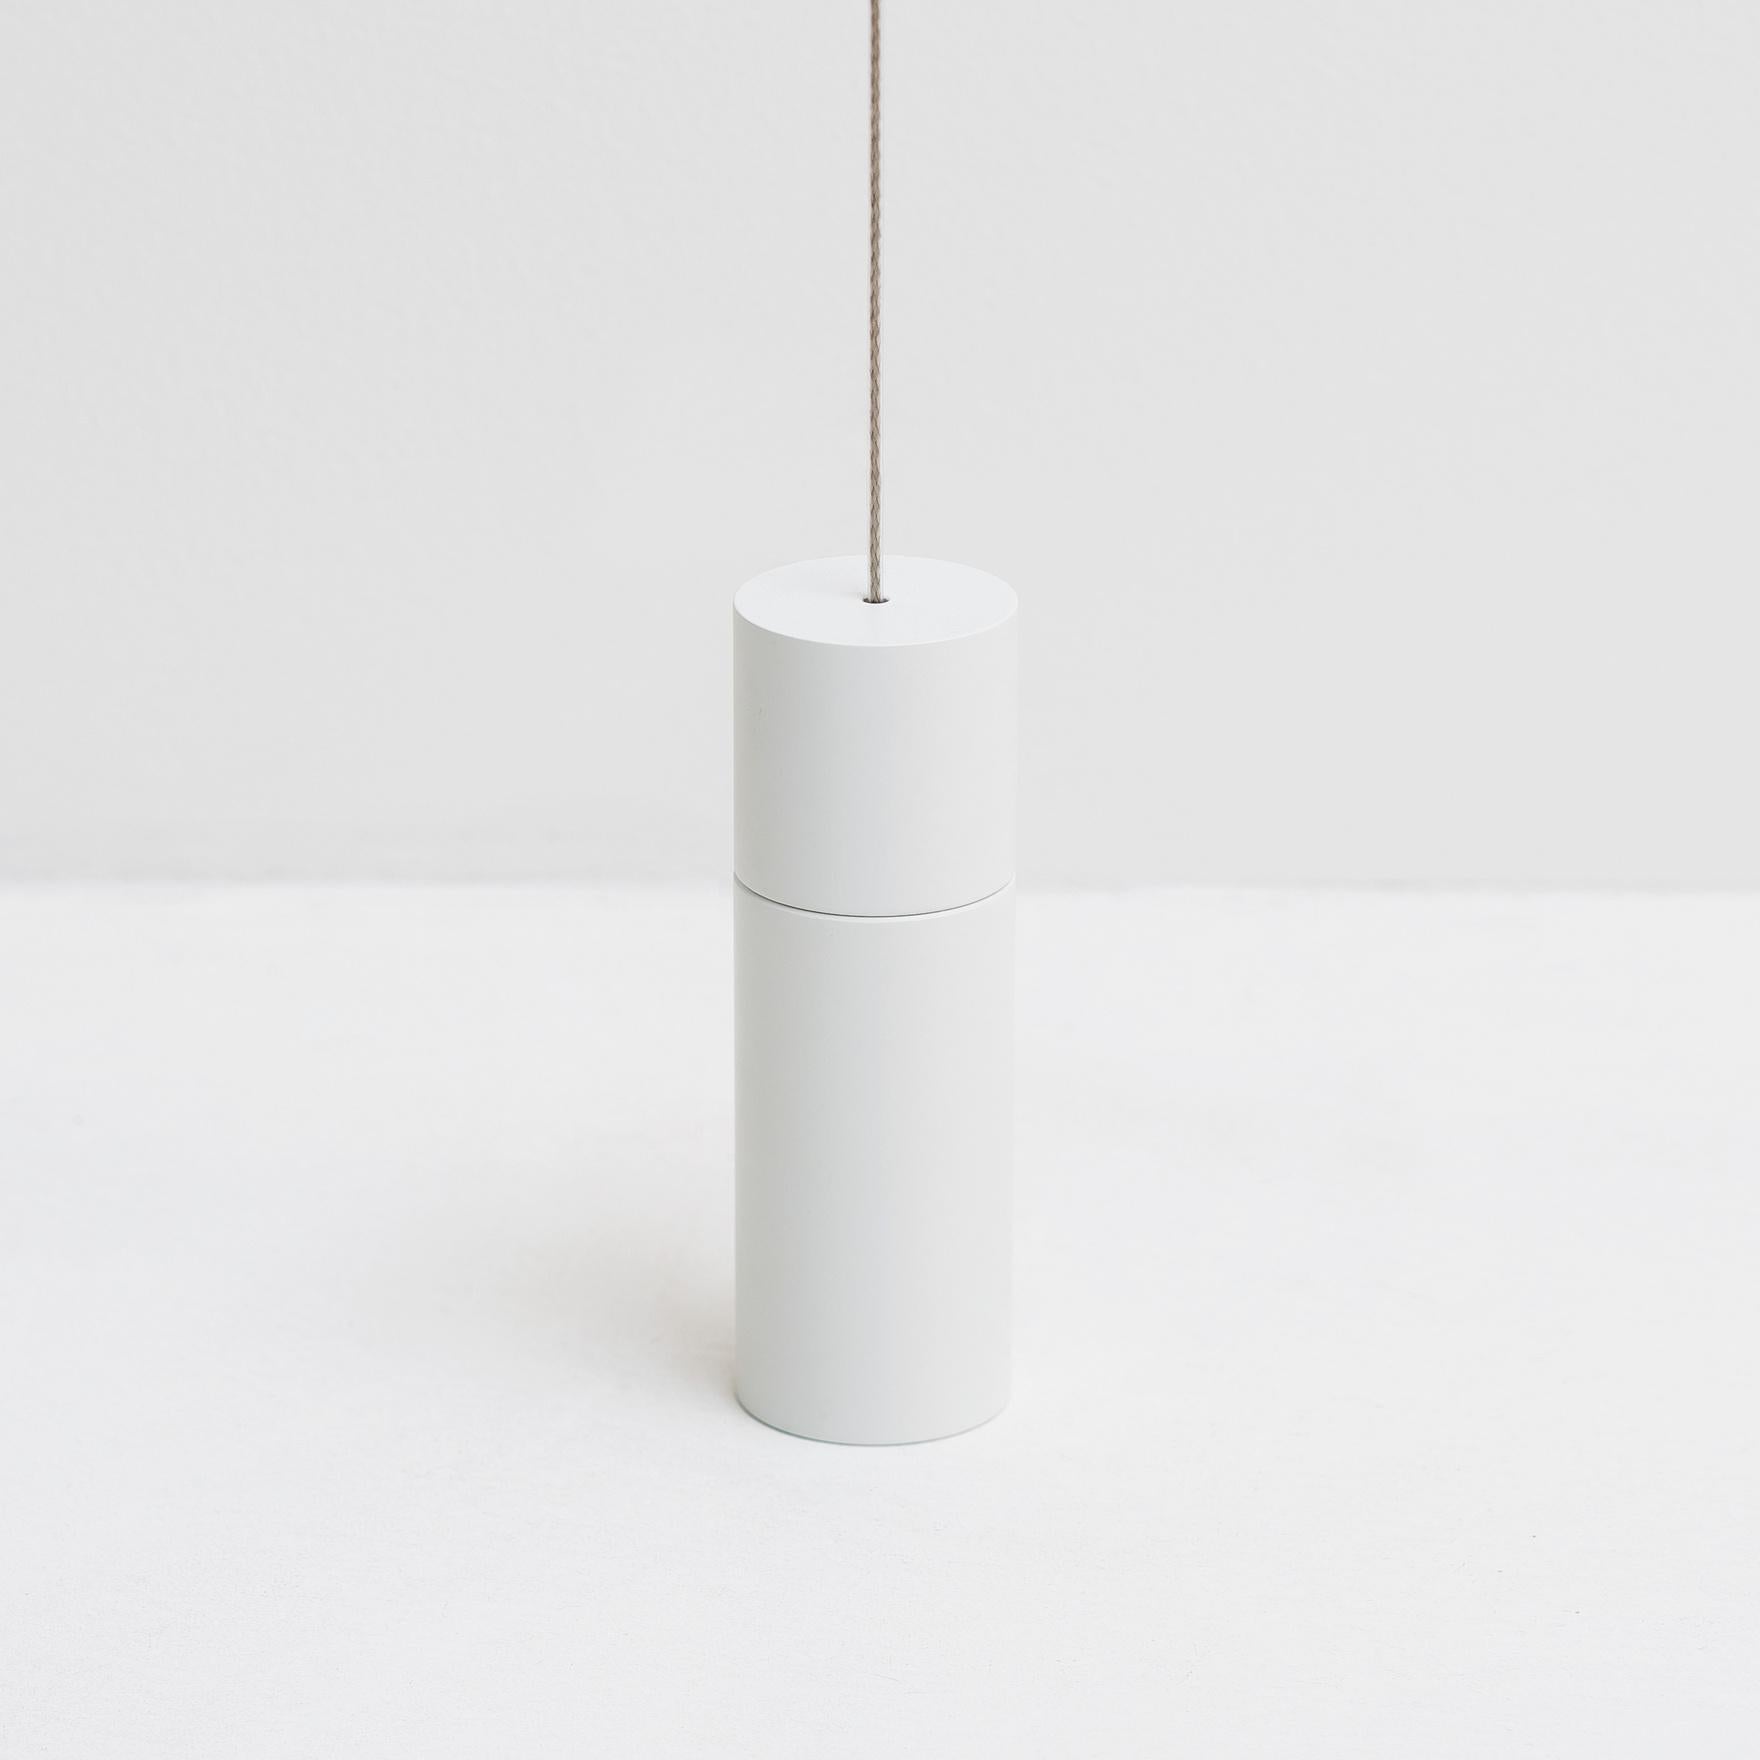 Davide Groppi MASAI floor lamp in Matt white by  Maurizio Mancini  In New Condition For Sale In Brooklyn, NY